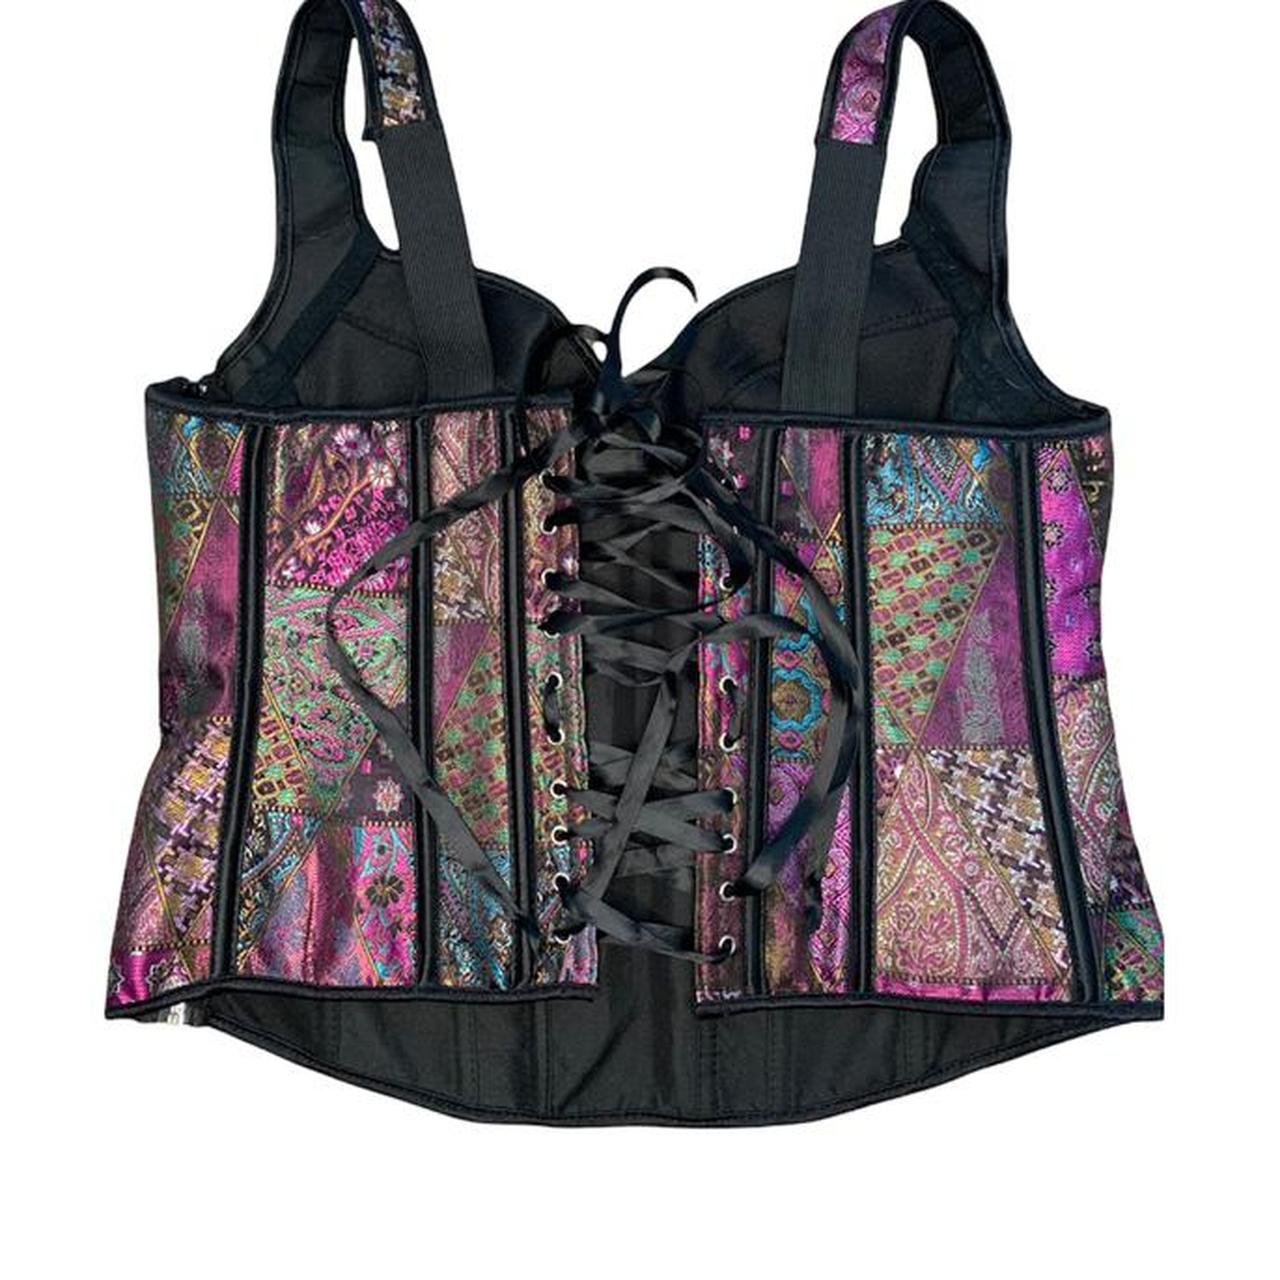 Product Image 2 - Patchwork Corset

Features multiple hues of